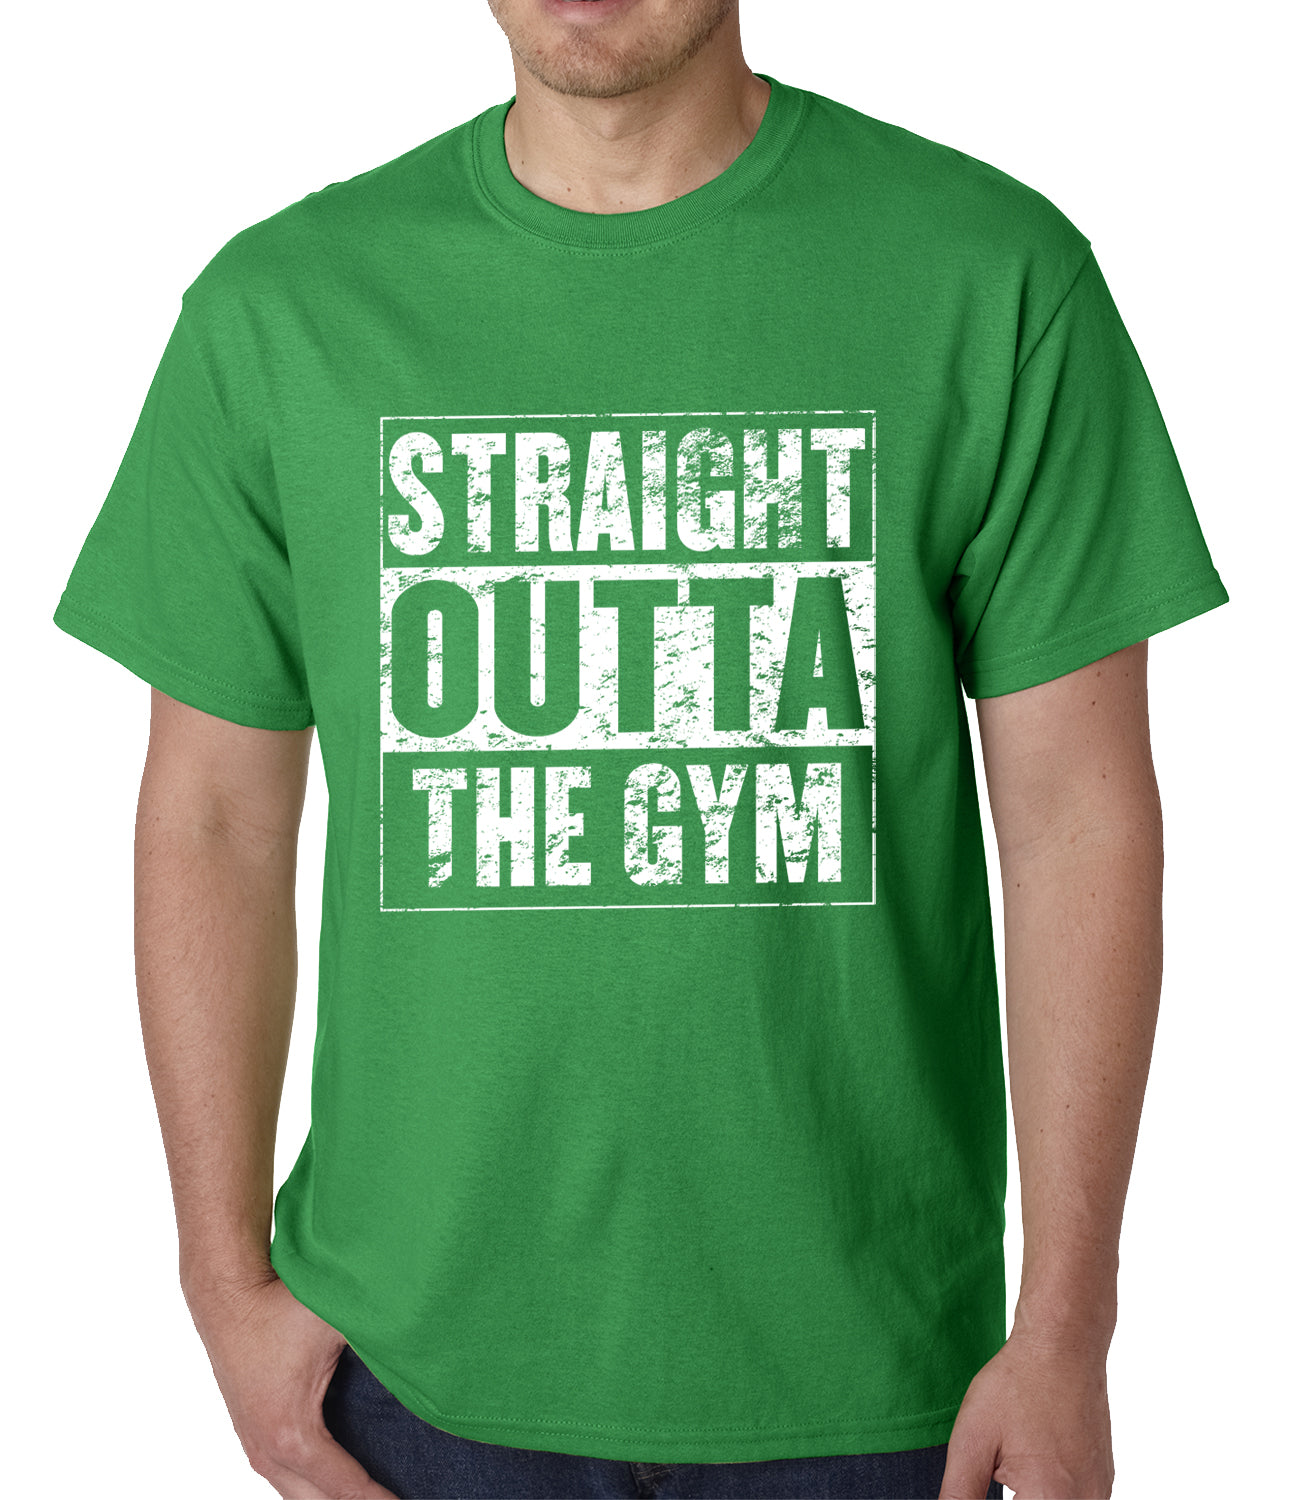 Straight Outta The Gym Mens T-shirt